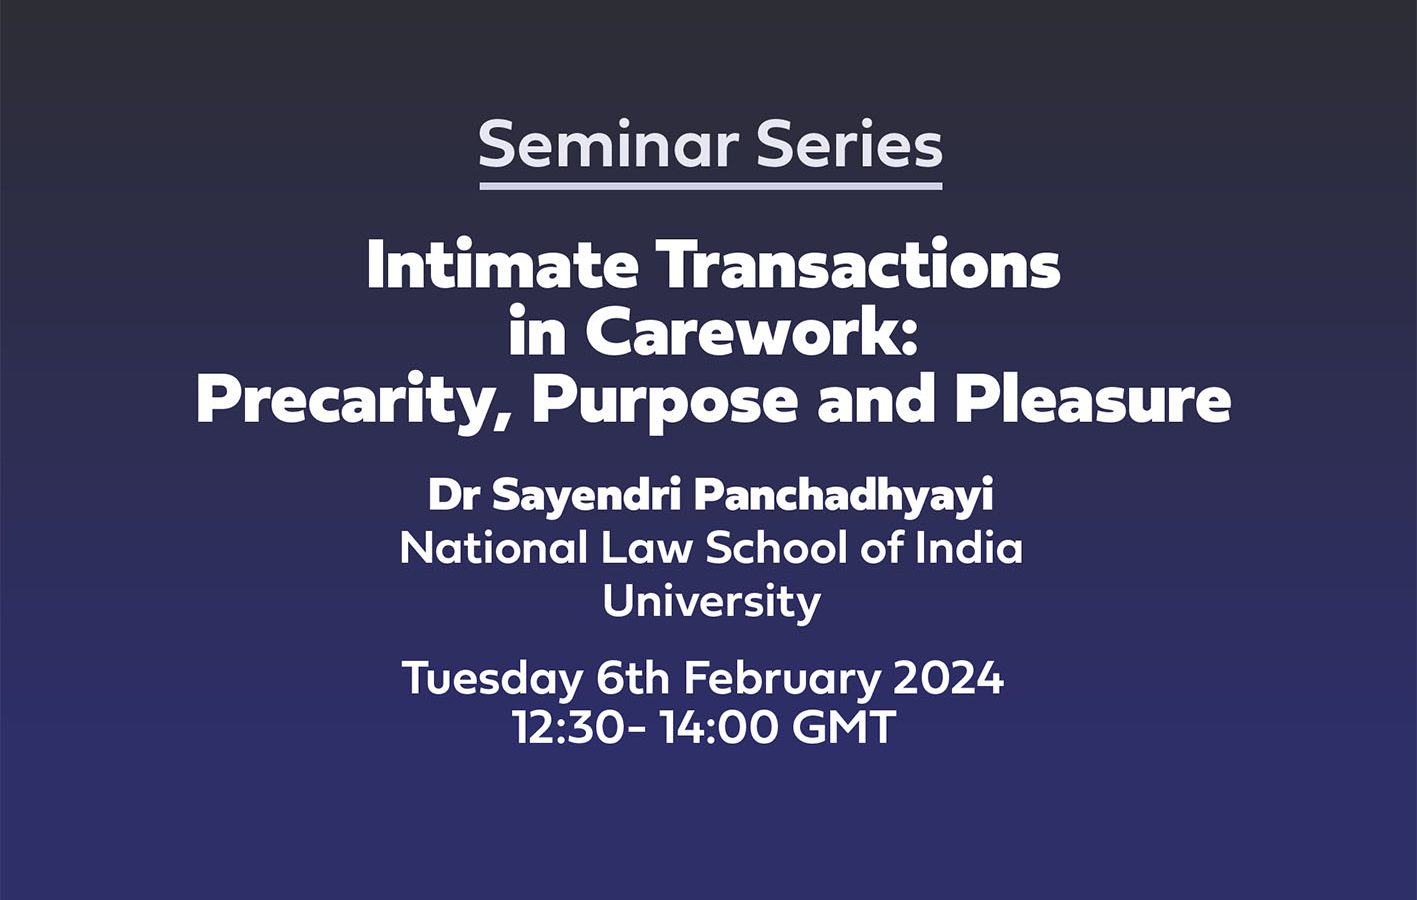 Text: Seminar Series Intimate Transactions in Carework: Precarity, Purpose and Pleasure Dr Sayendri Panchadhyayi National Law School of India University Tuesday 6th February 2024 12:30- 14:00 GMT